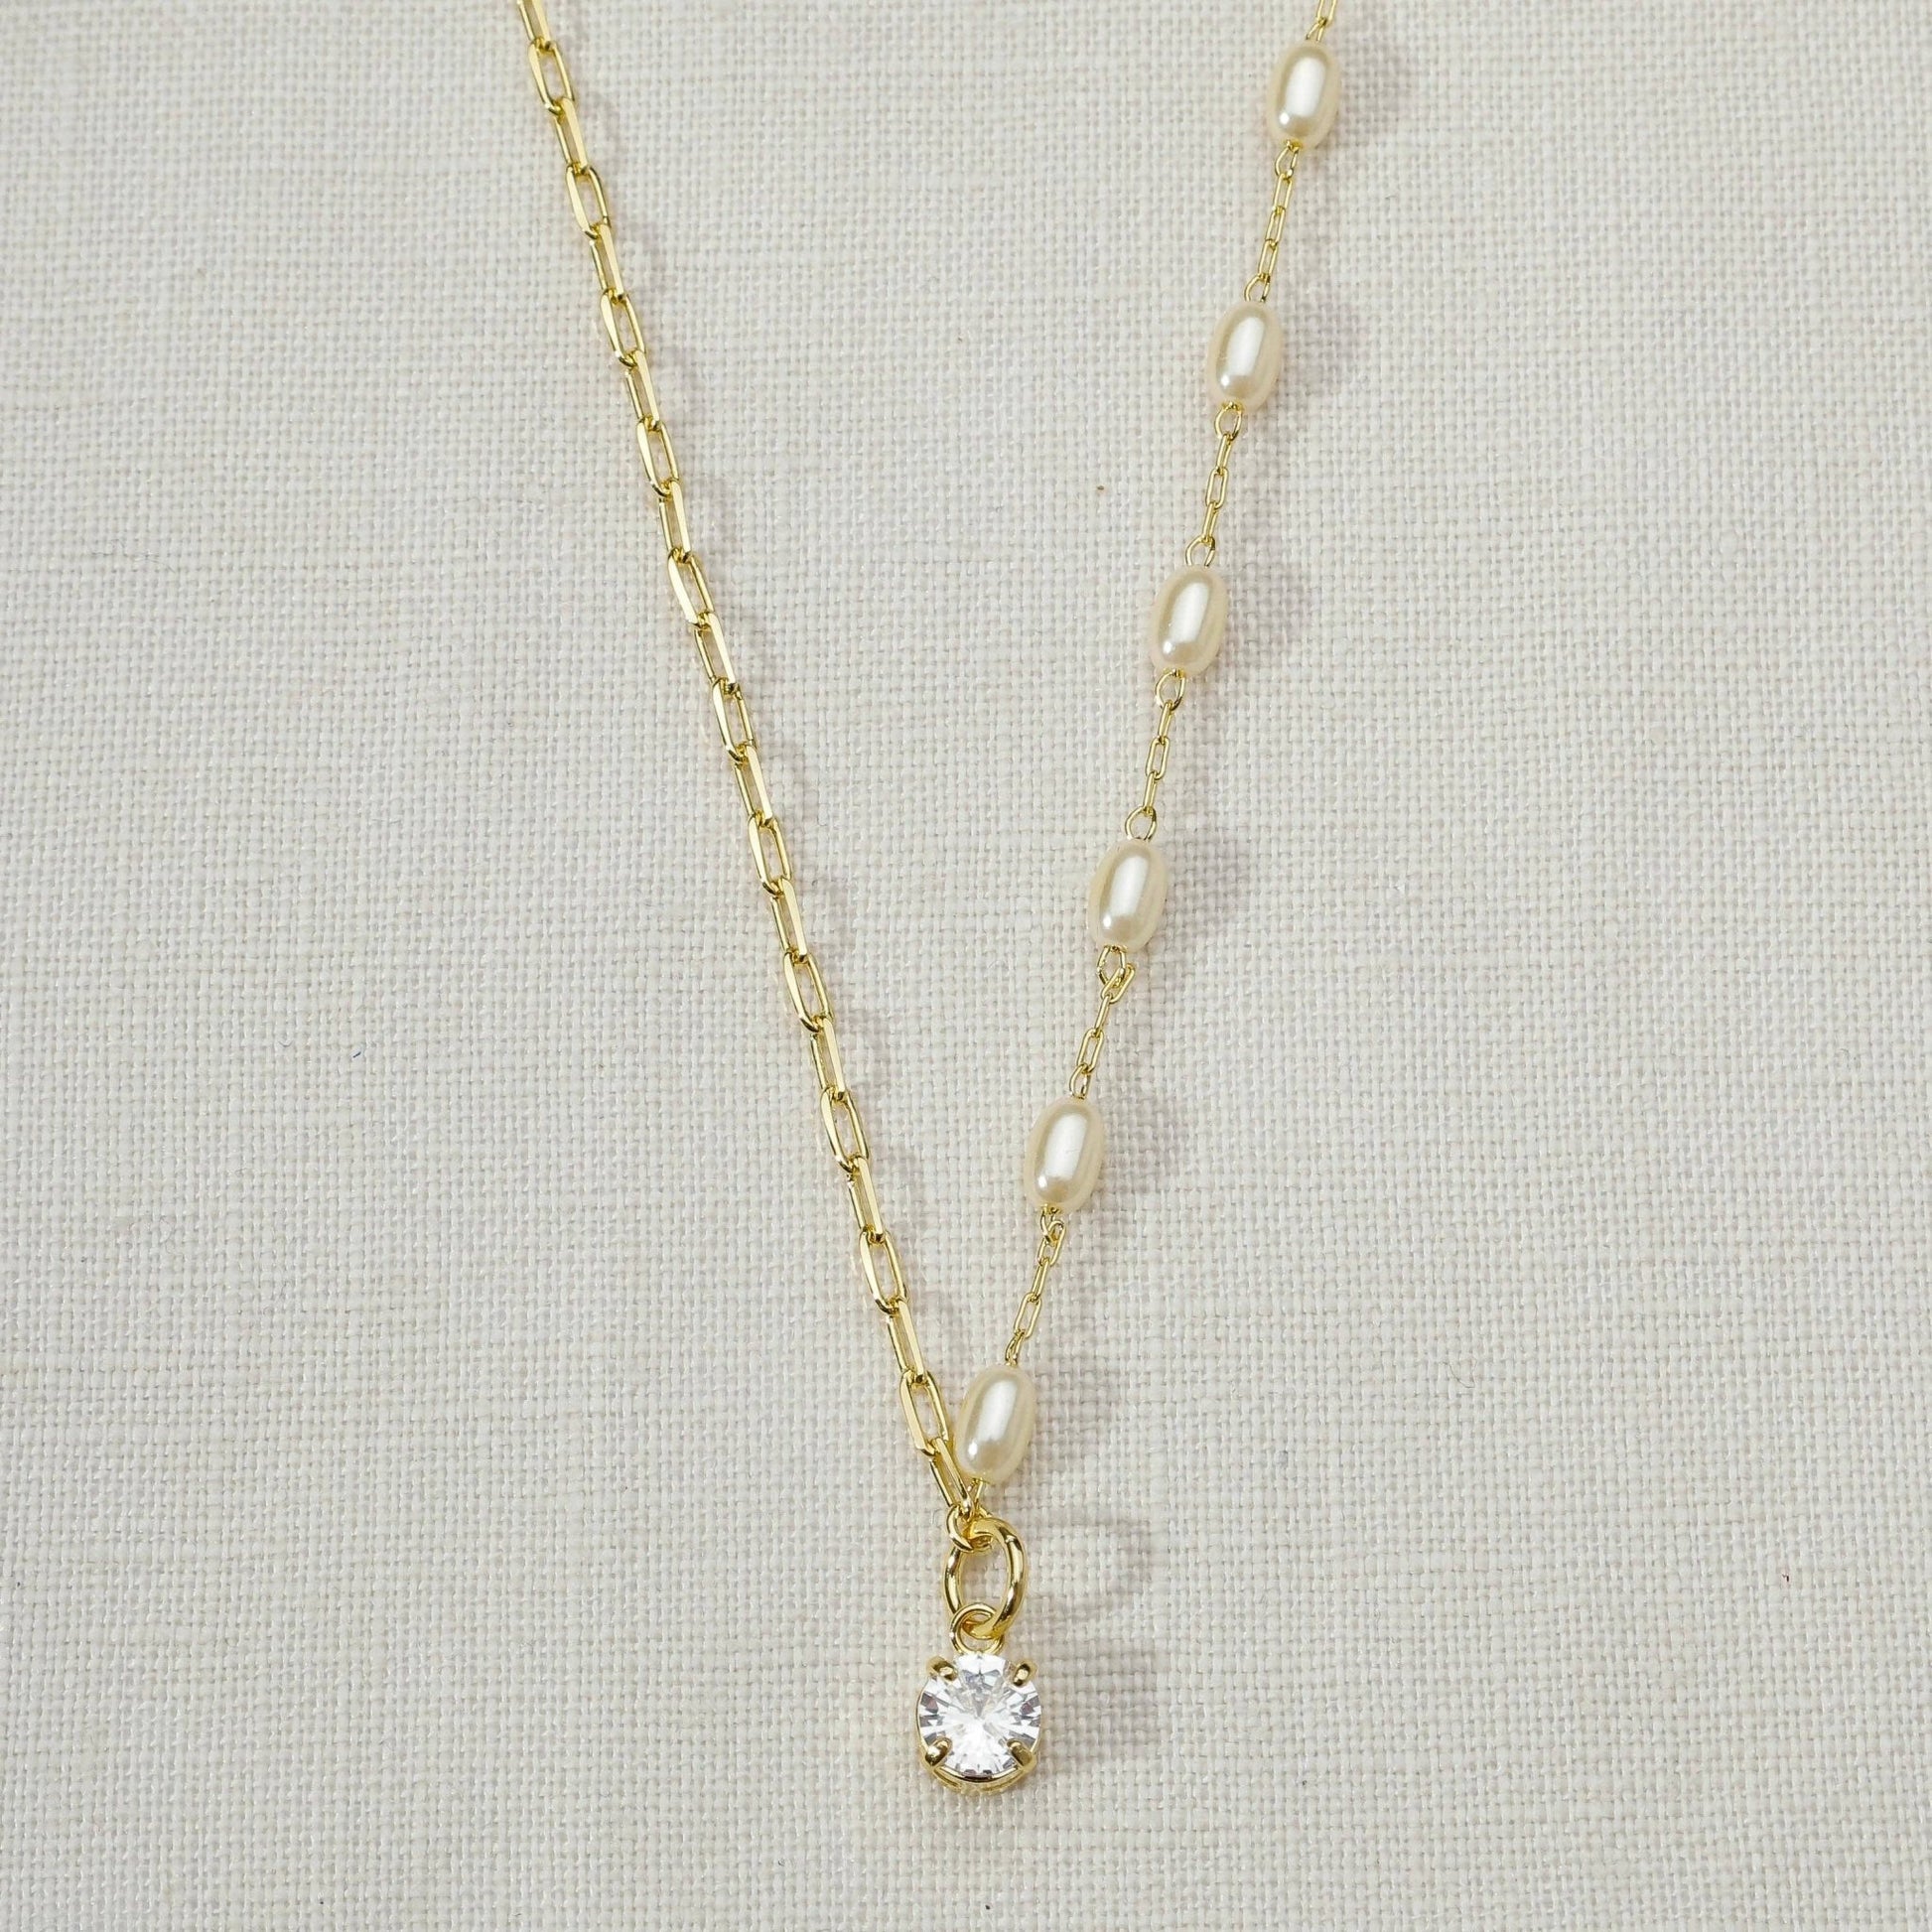 18k Gold Filled Oval Shaped Pearl Necklace With Cubic Zirconia Stone Charm - FOREVERLINKX